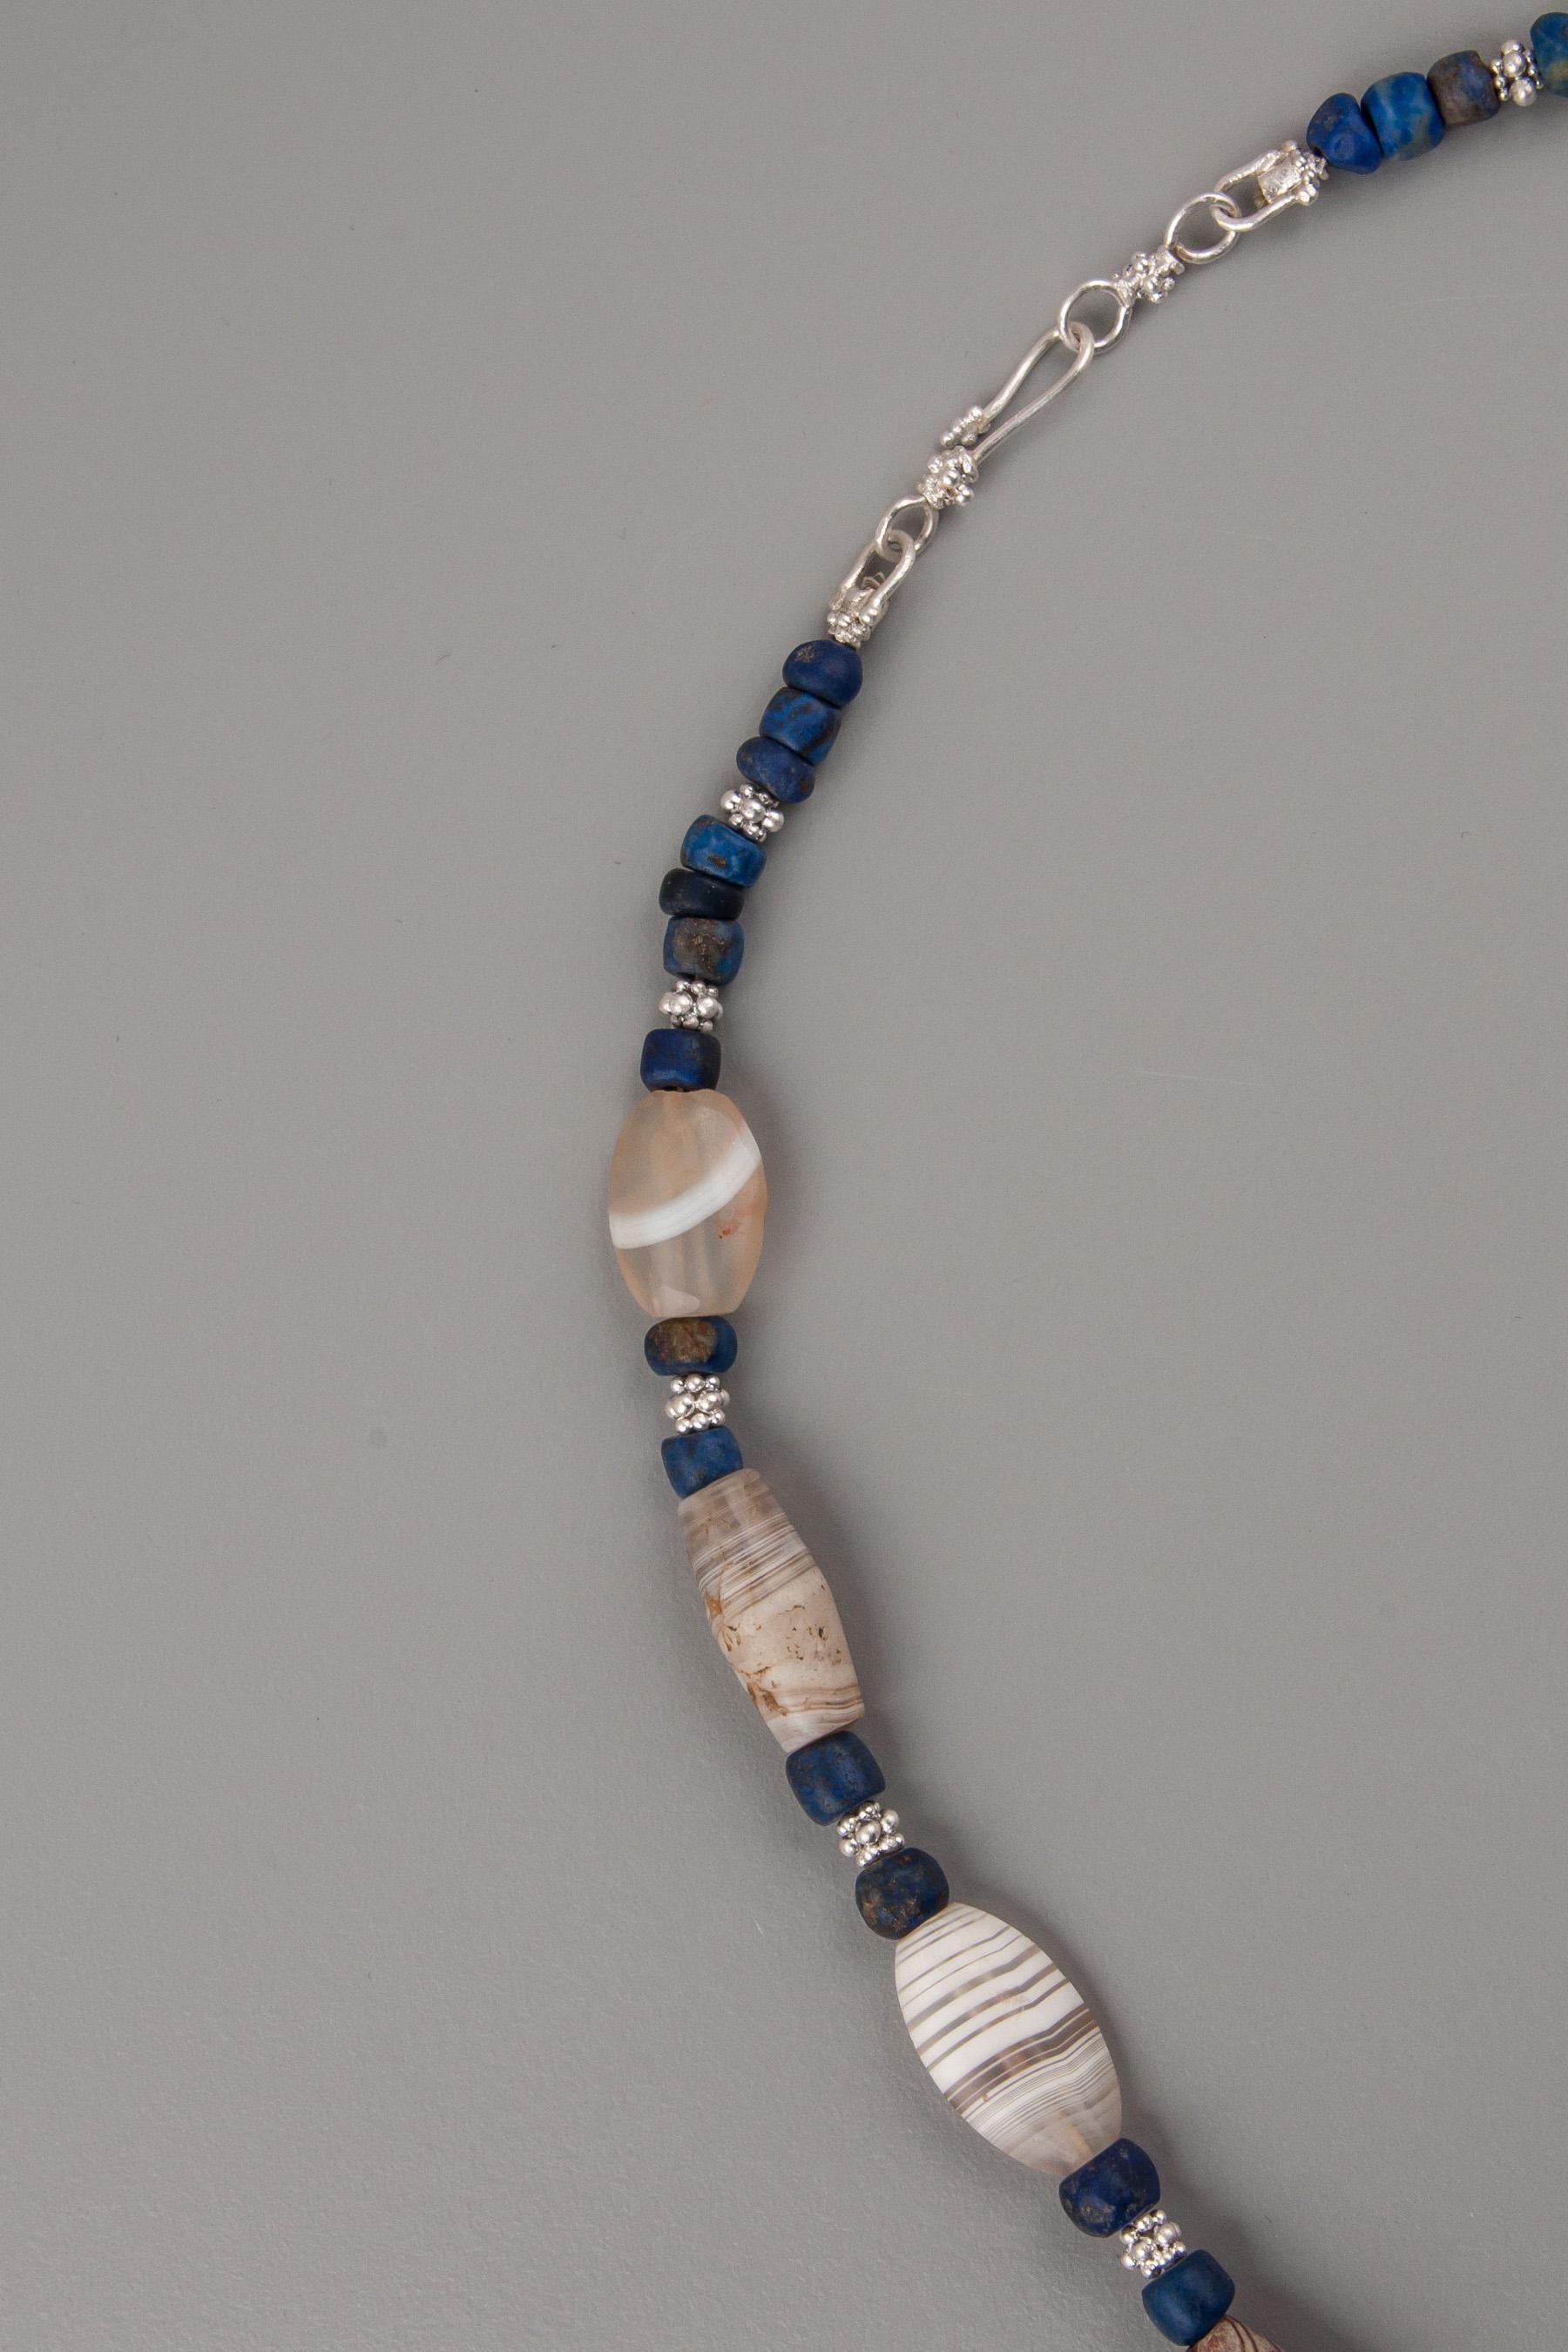 Artist Bronze Age Agate Beads with Lapis Lazuli and Granulated Silver Spacers For Sale